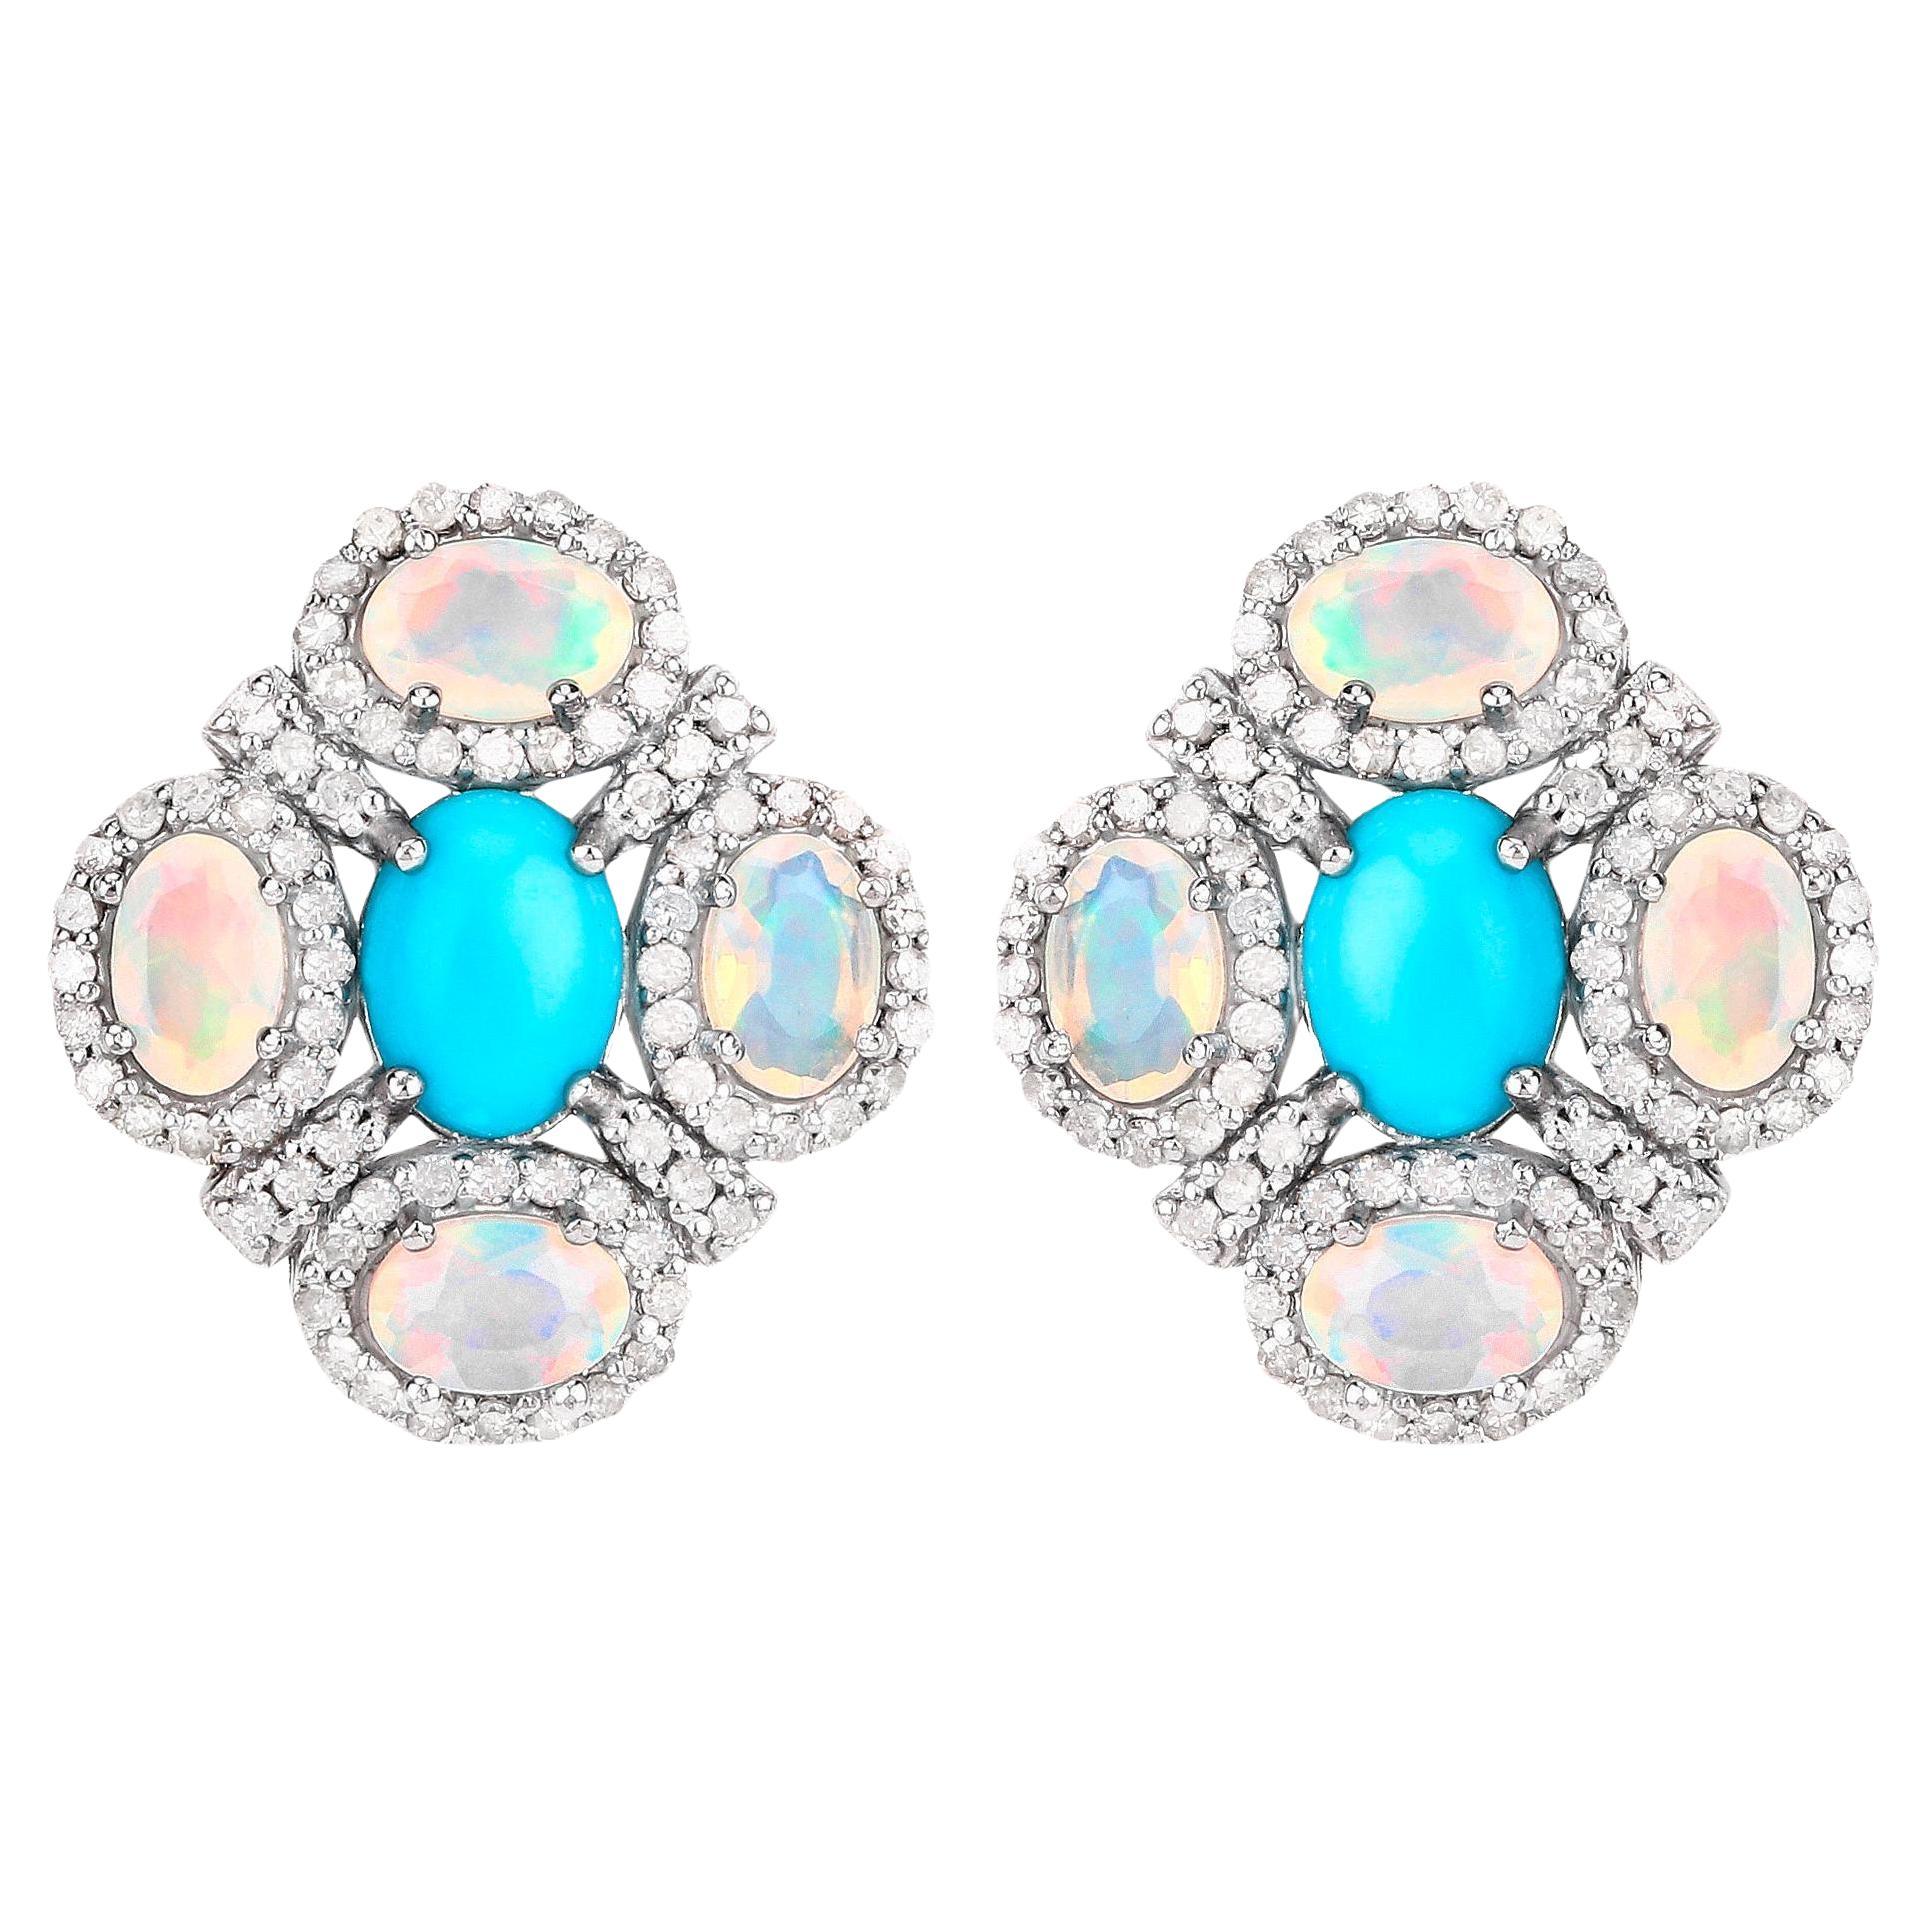 Rainbow Earrings Turquoise Opals Diamonds 5.15 Carats For Sale